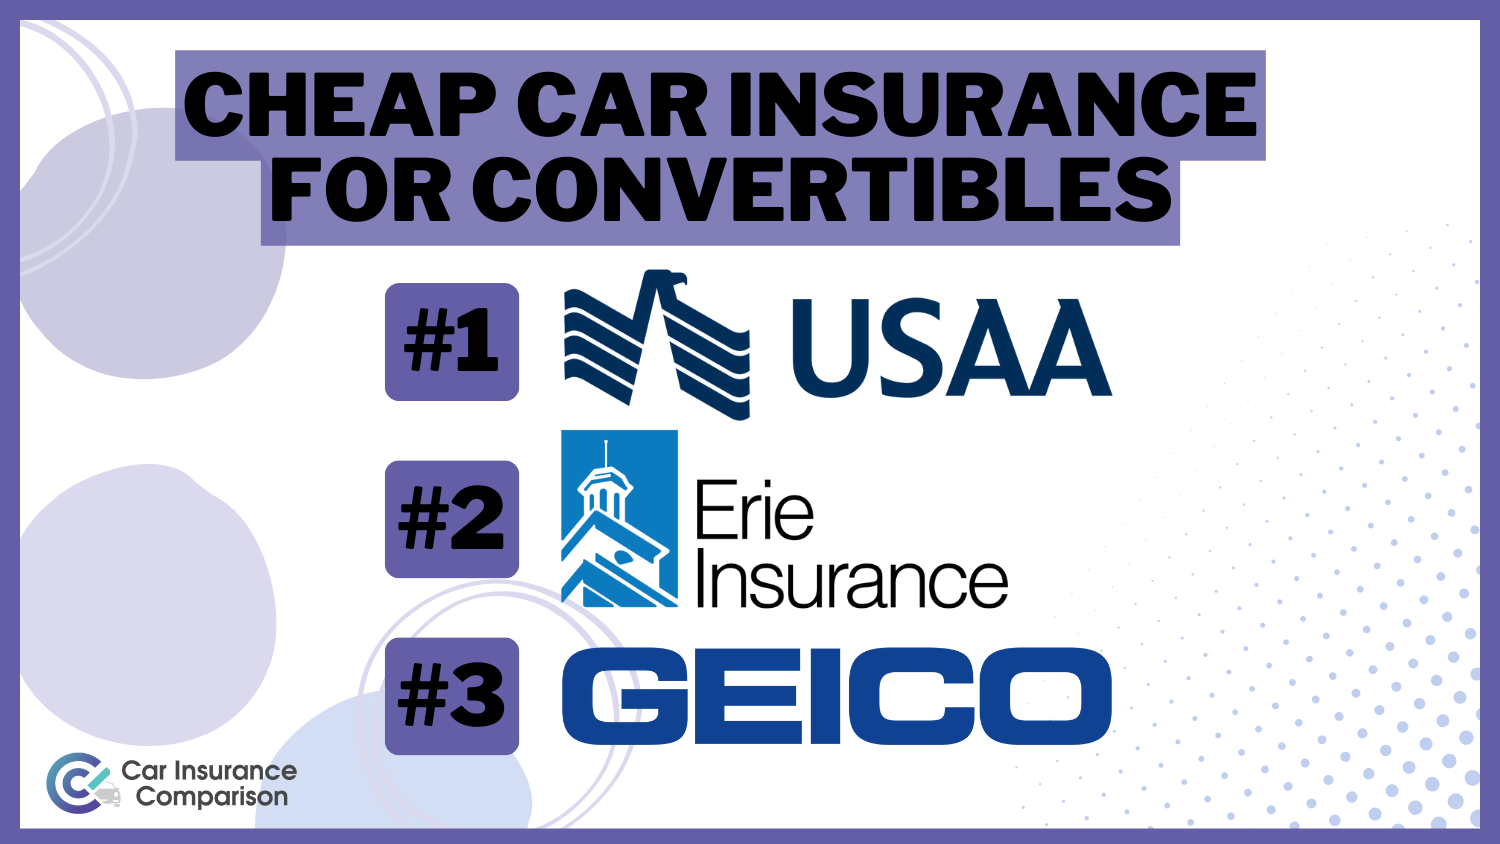 Cheap Car Insurance for Convertibles: USAA, Erie, and Geico